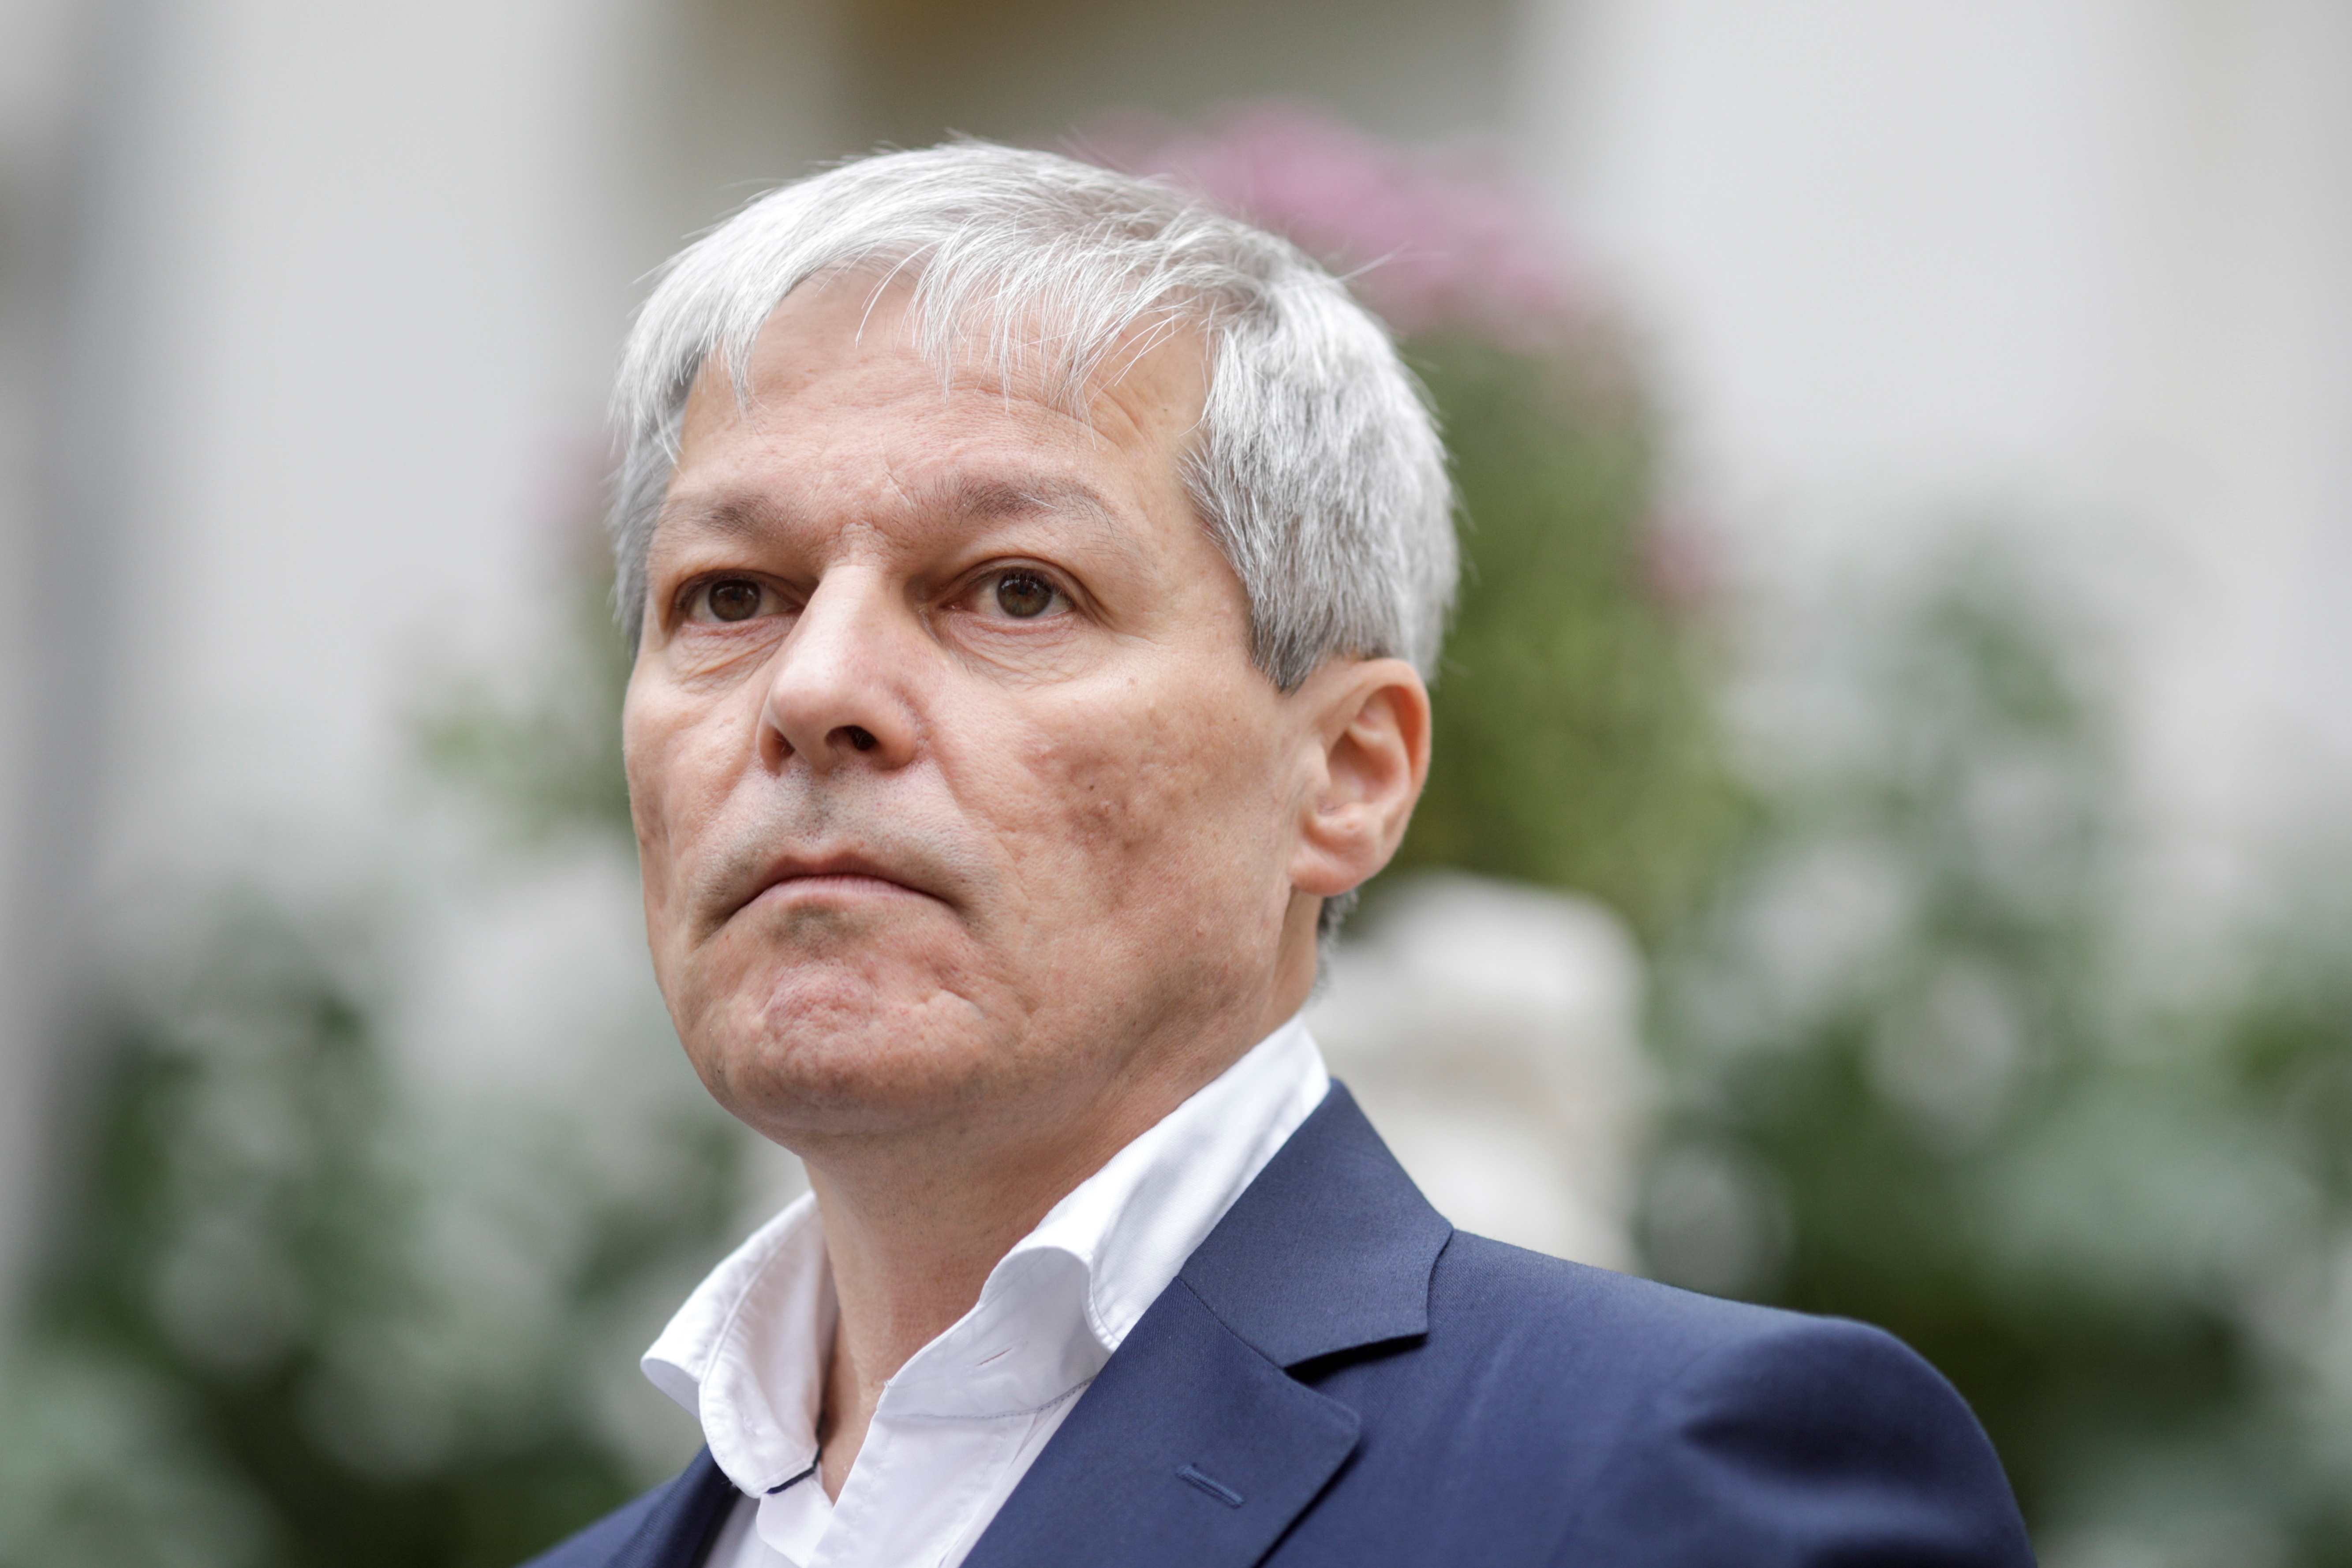 Dacian Ciolos, leader of the USR party, attends a news conference at the headquarters of the USR PLUS alliance